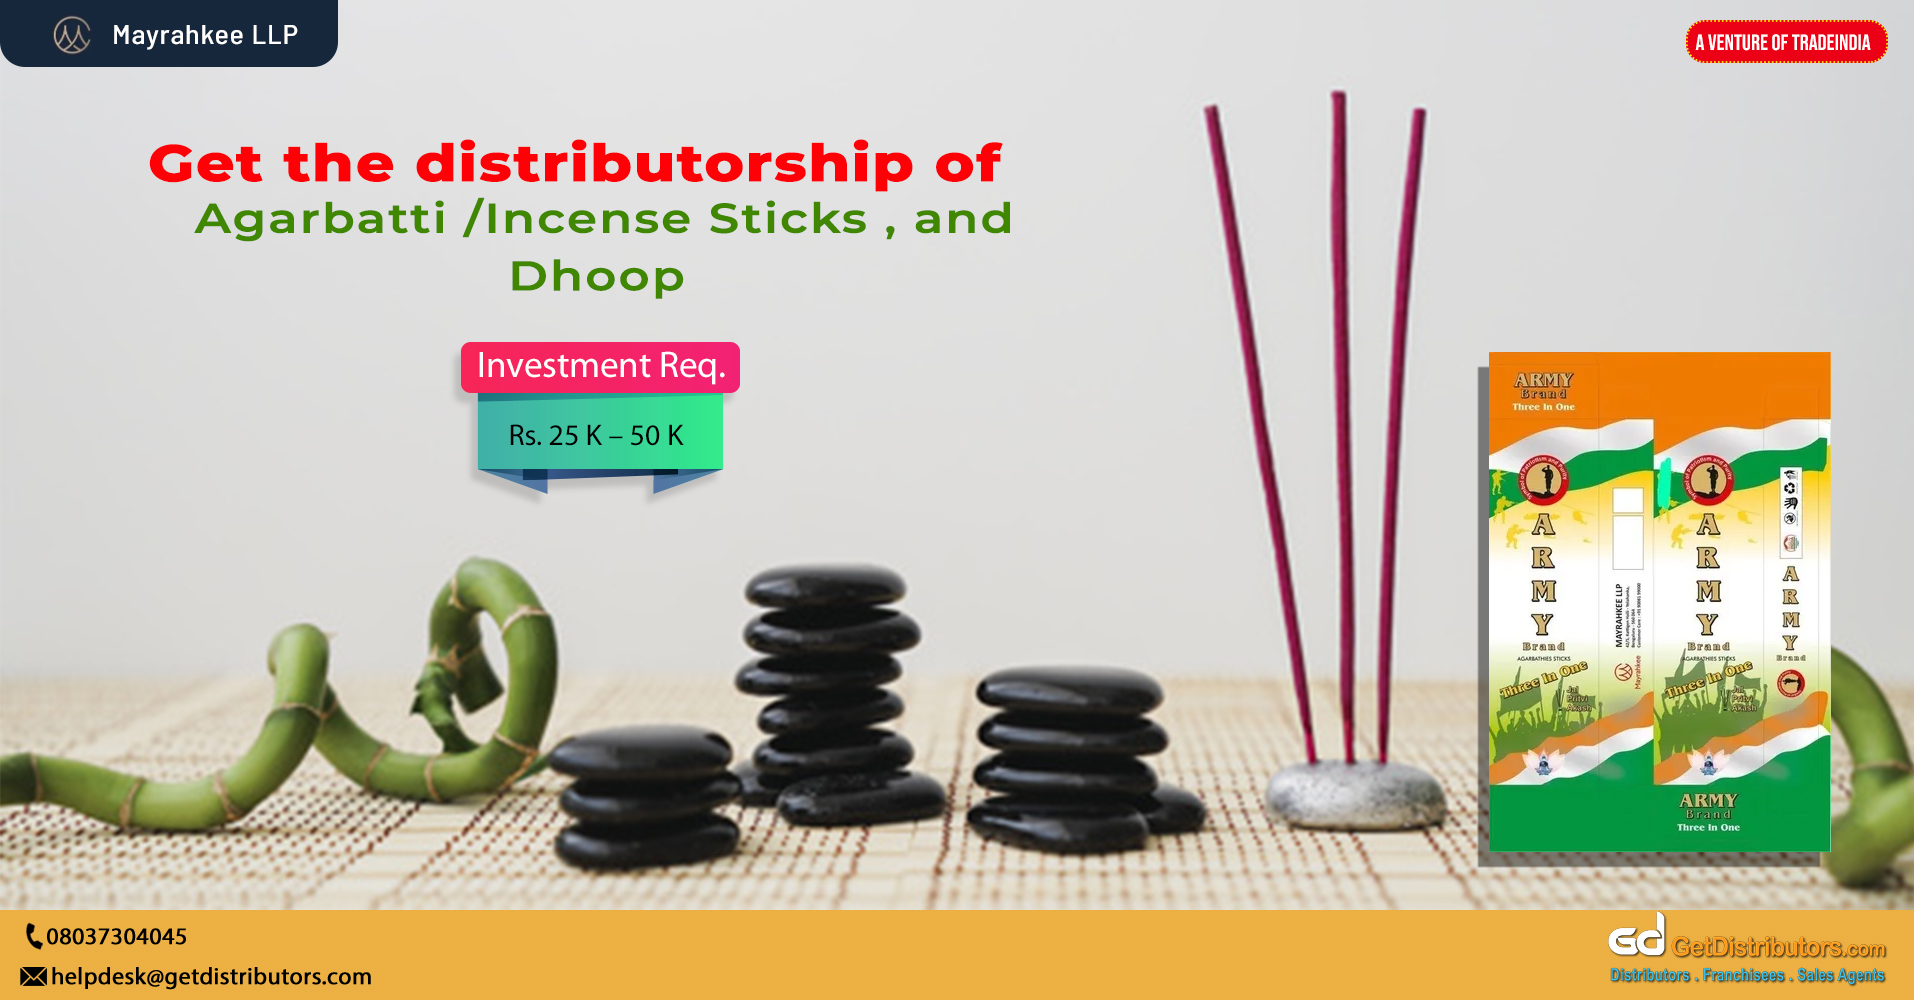 Distributorship of high-quality agarbattis, incense sticks, and dhoops at cost-effective rates